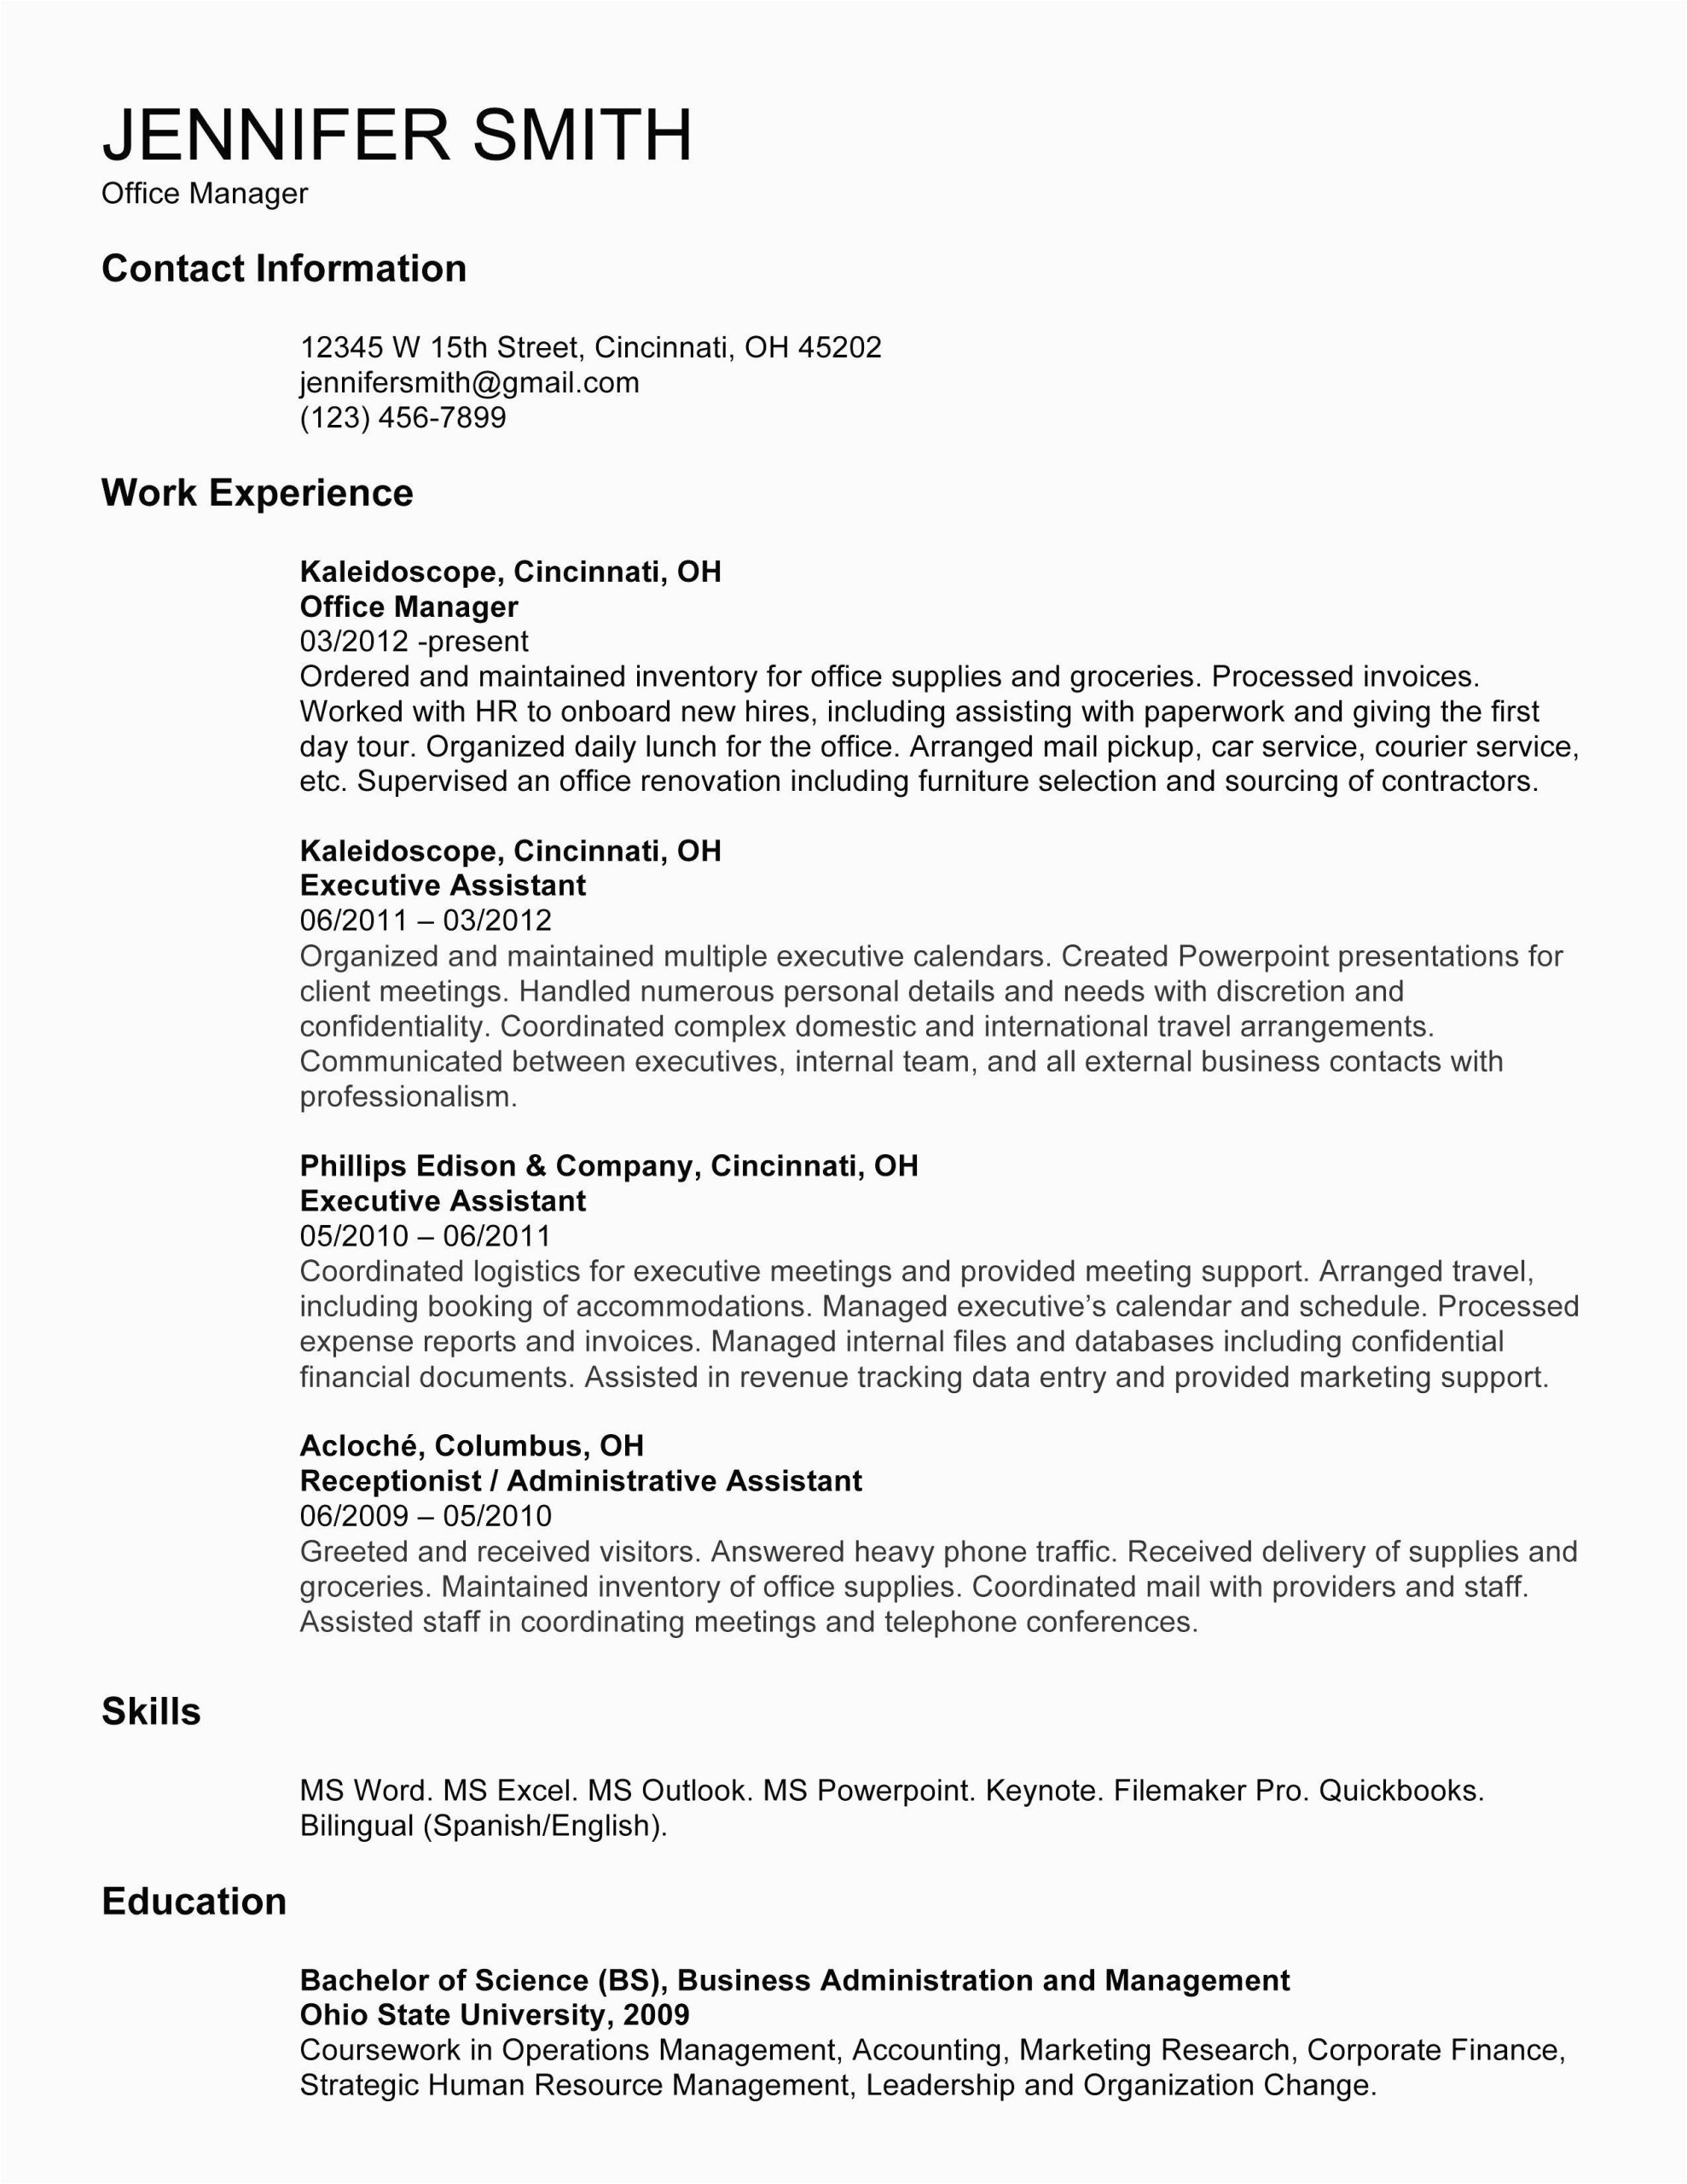 Resume Sample when Having Different Positions at Same Company Resume Example Multiple Positions Same Pany